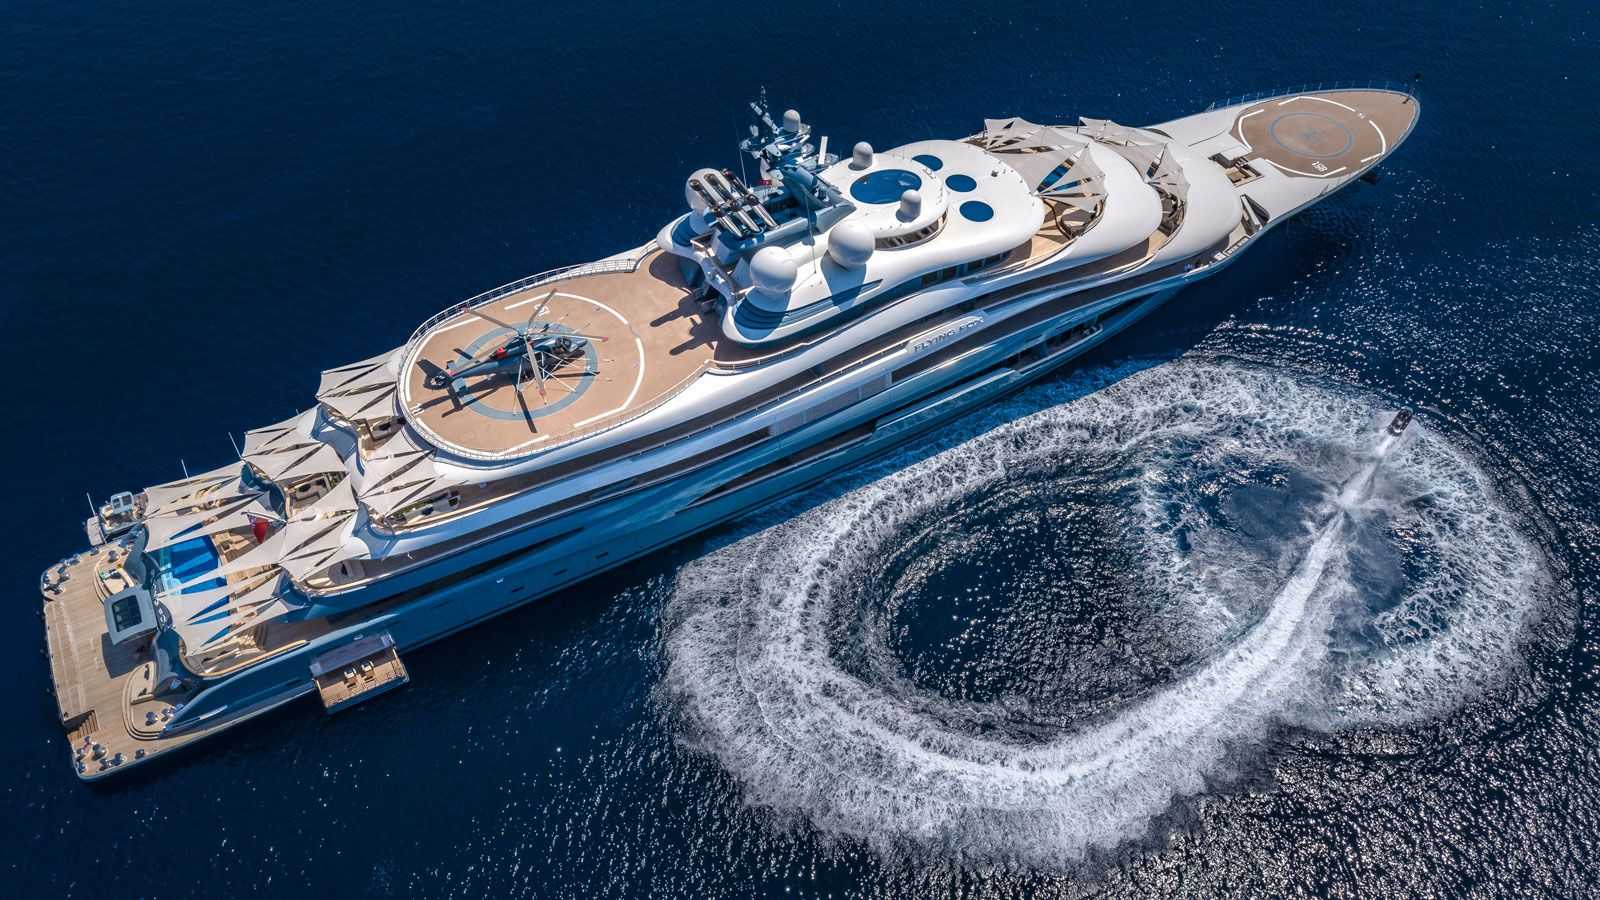 The Top 10 Most Expensive Yachts in the World